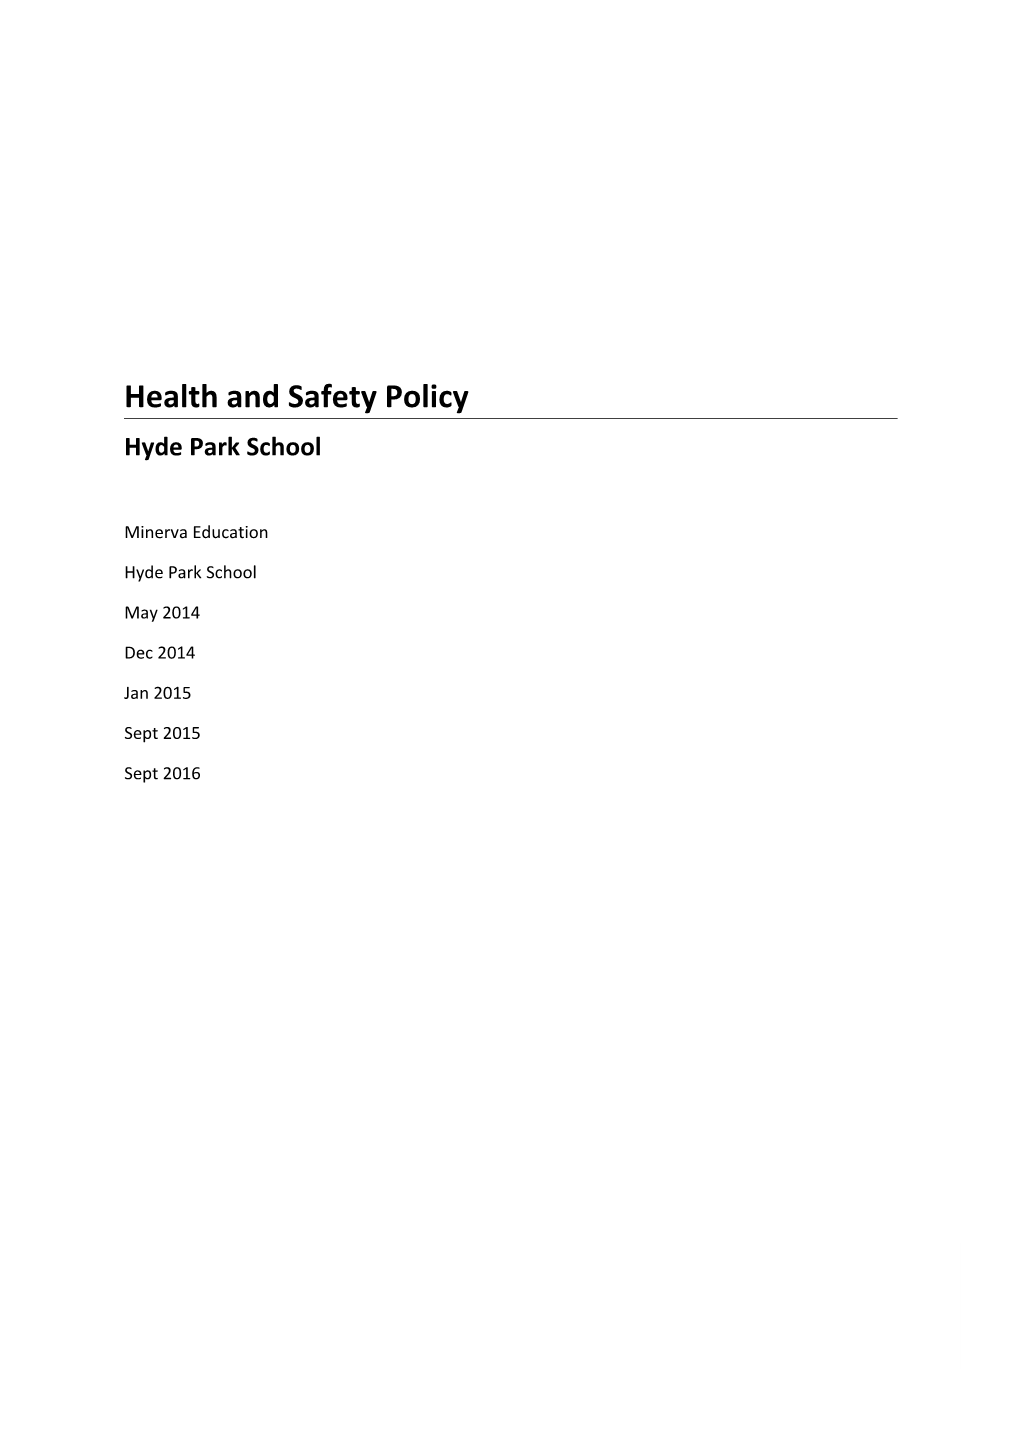 Comlit: Health and Safety Policy V1.4 08 Oct 13